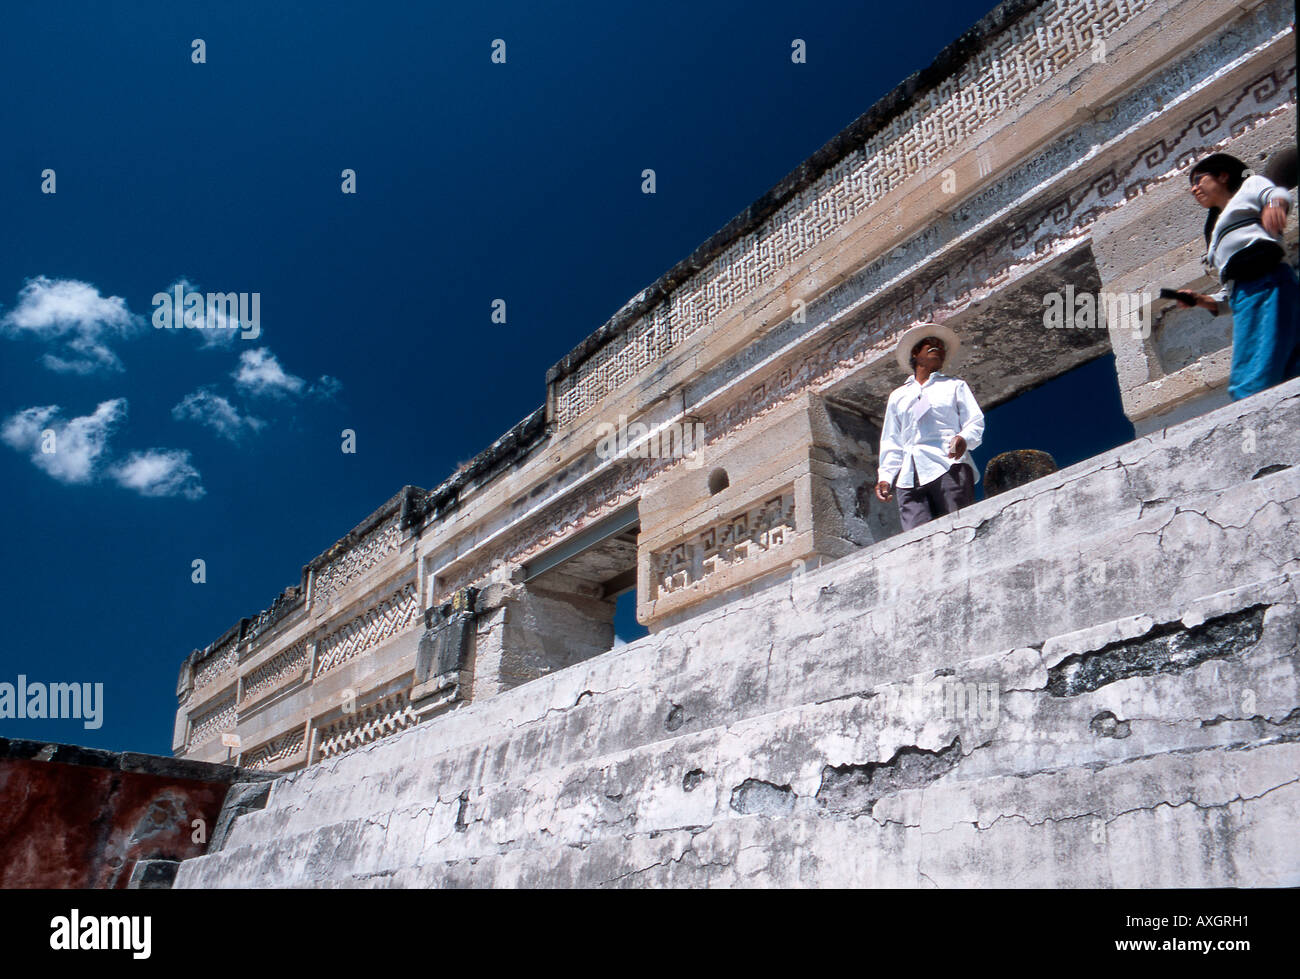 A government licensed guide explains the meaning of the architecture at the Mitla Archaeological site in Oaxaca Mexico. Stock Photo